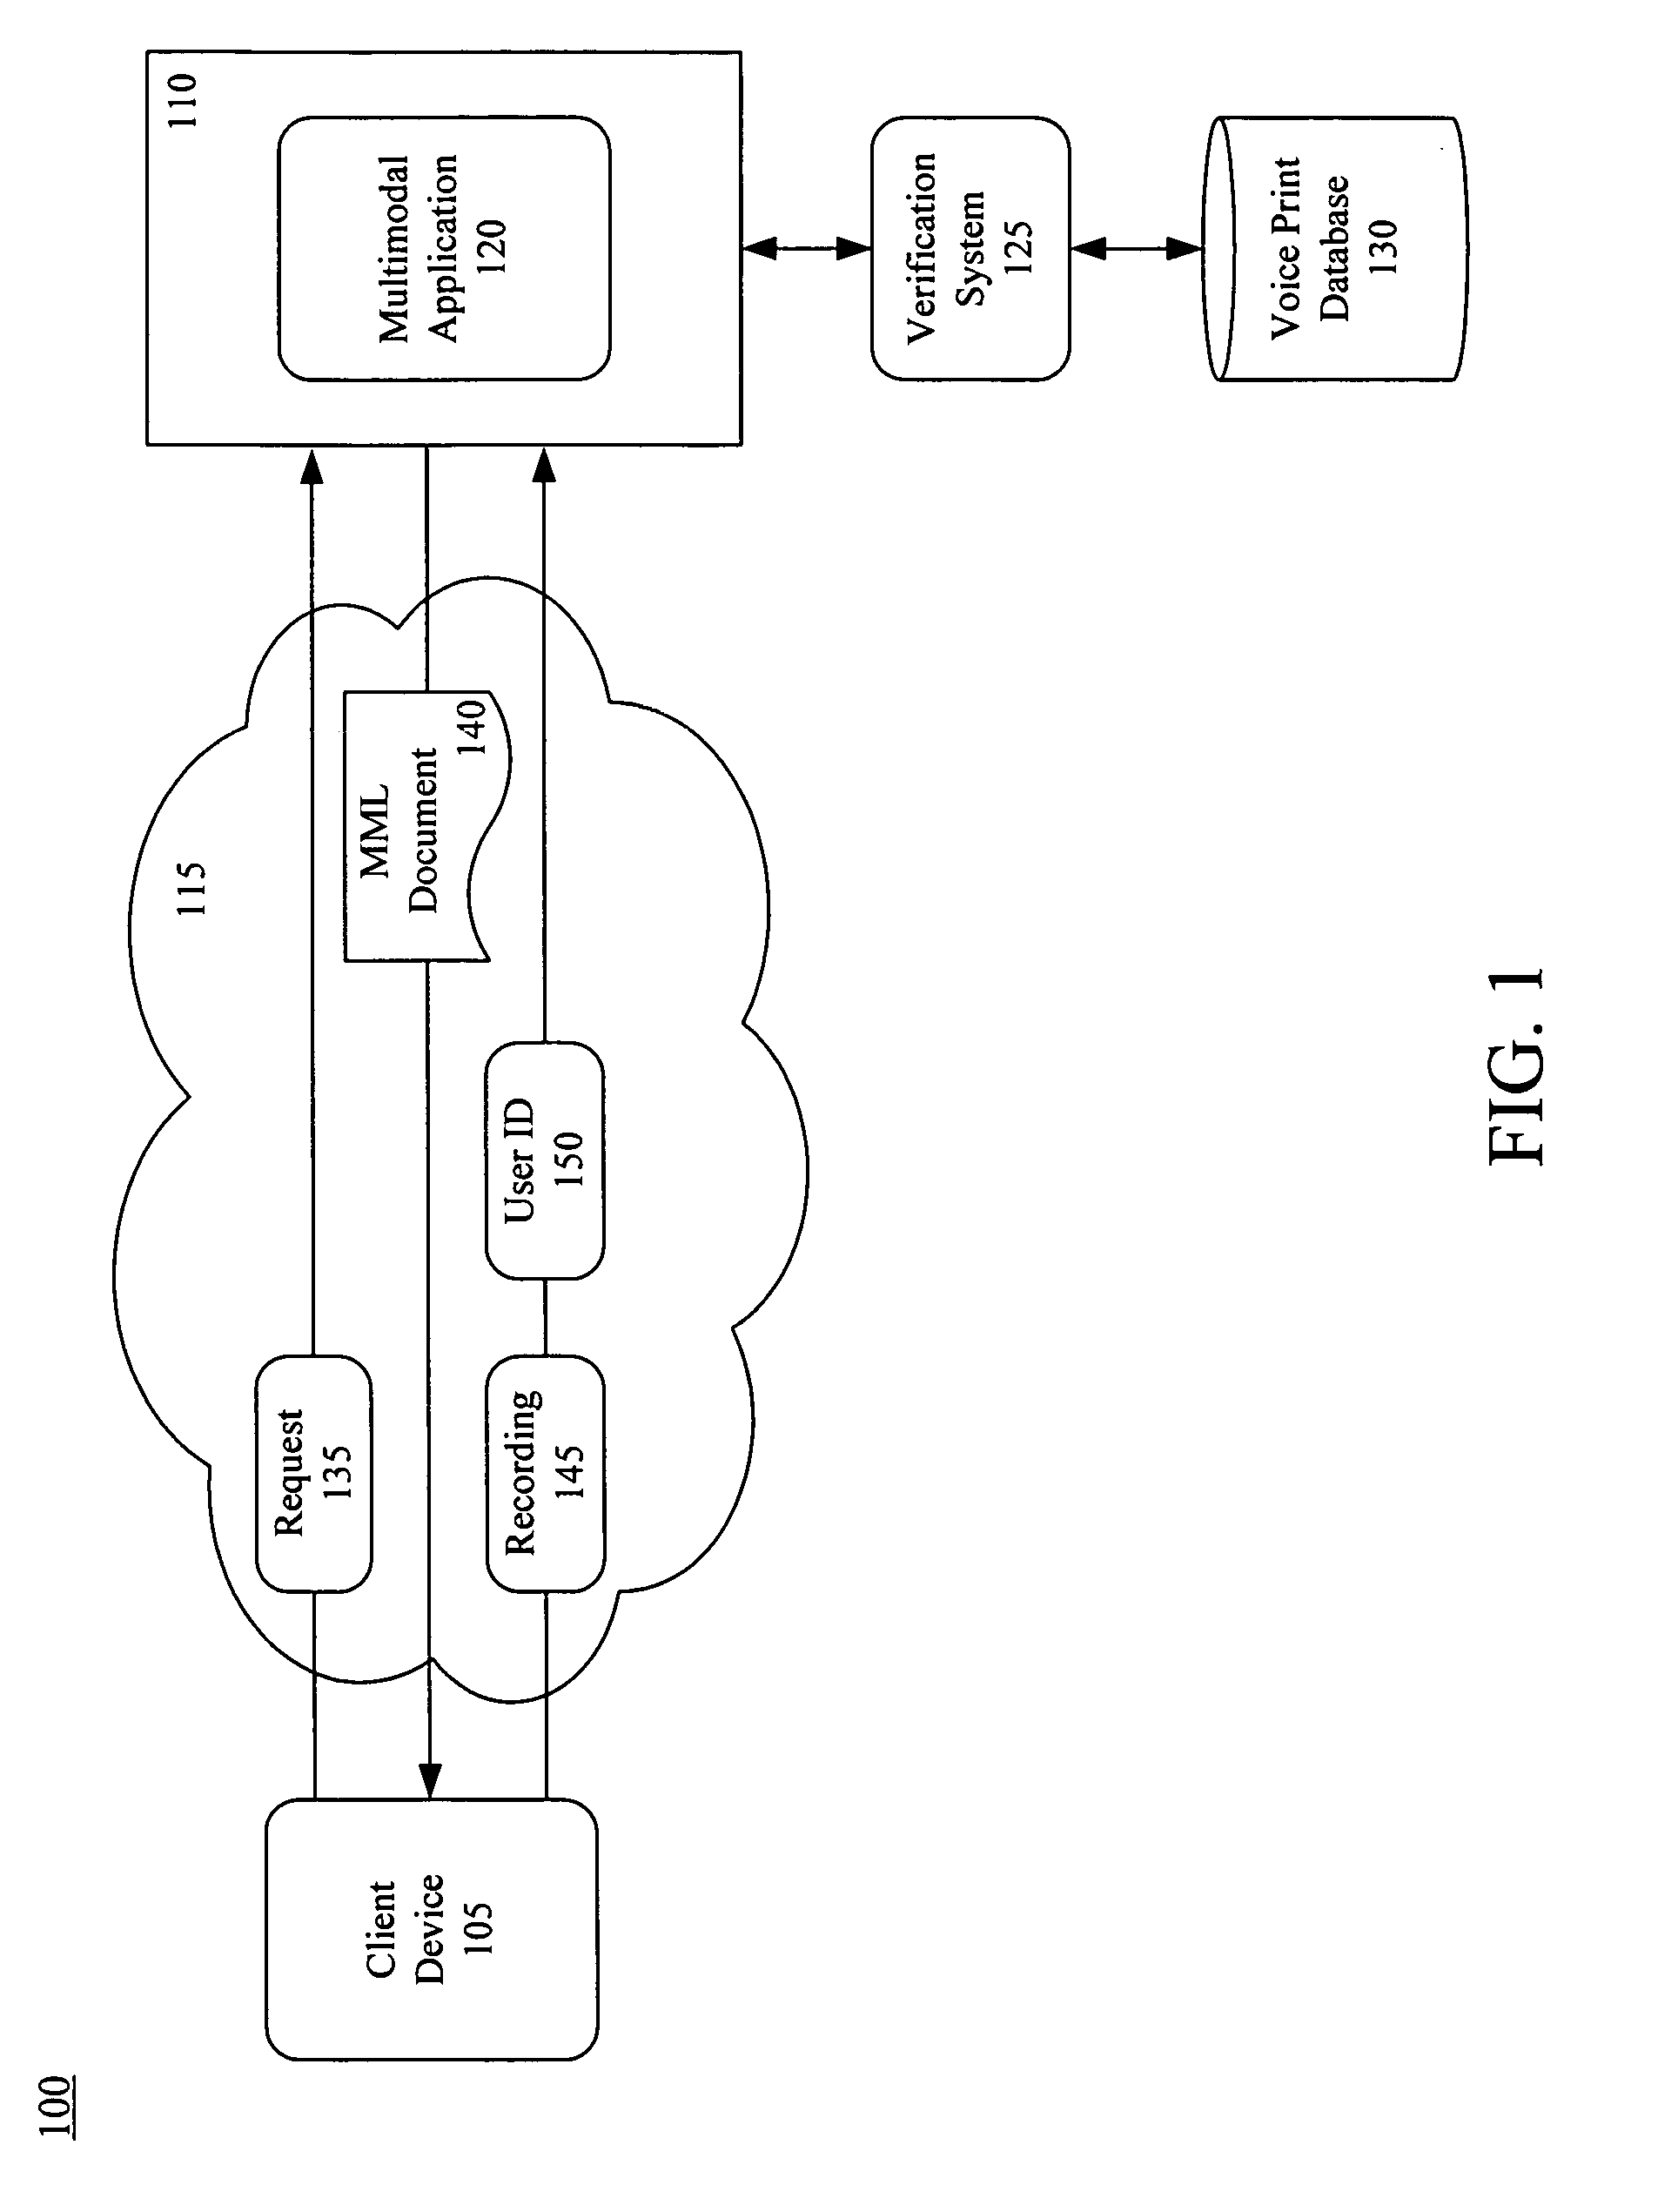 Verifying a user using speaker verification and a multimodal web-based interface